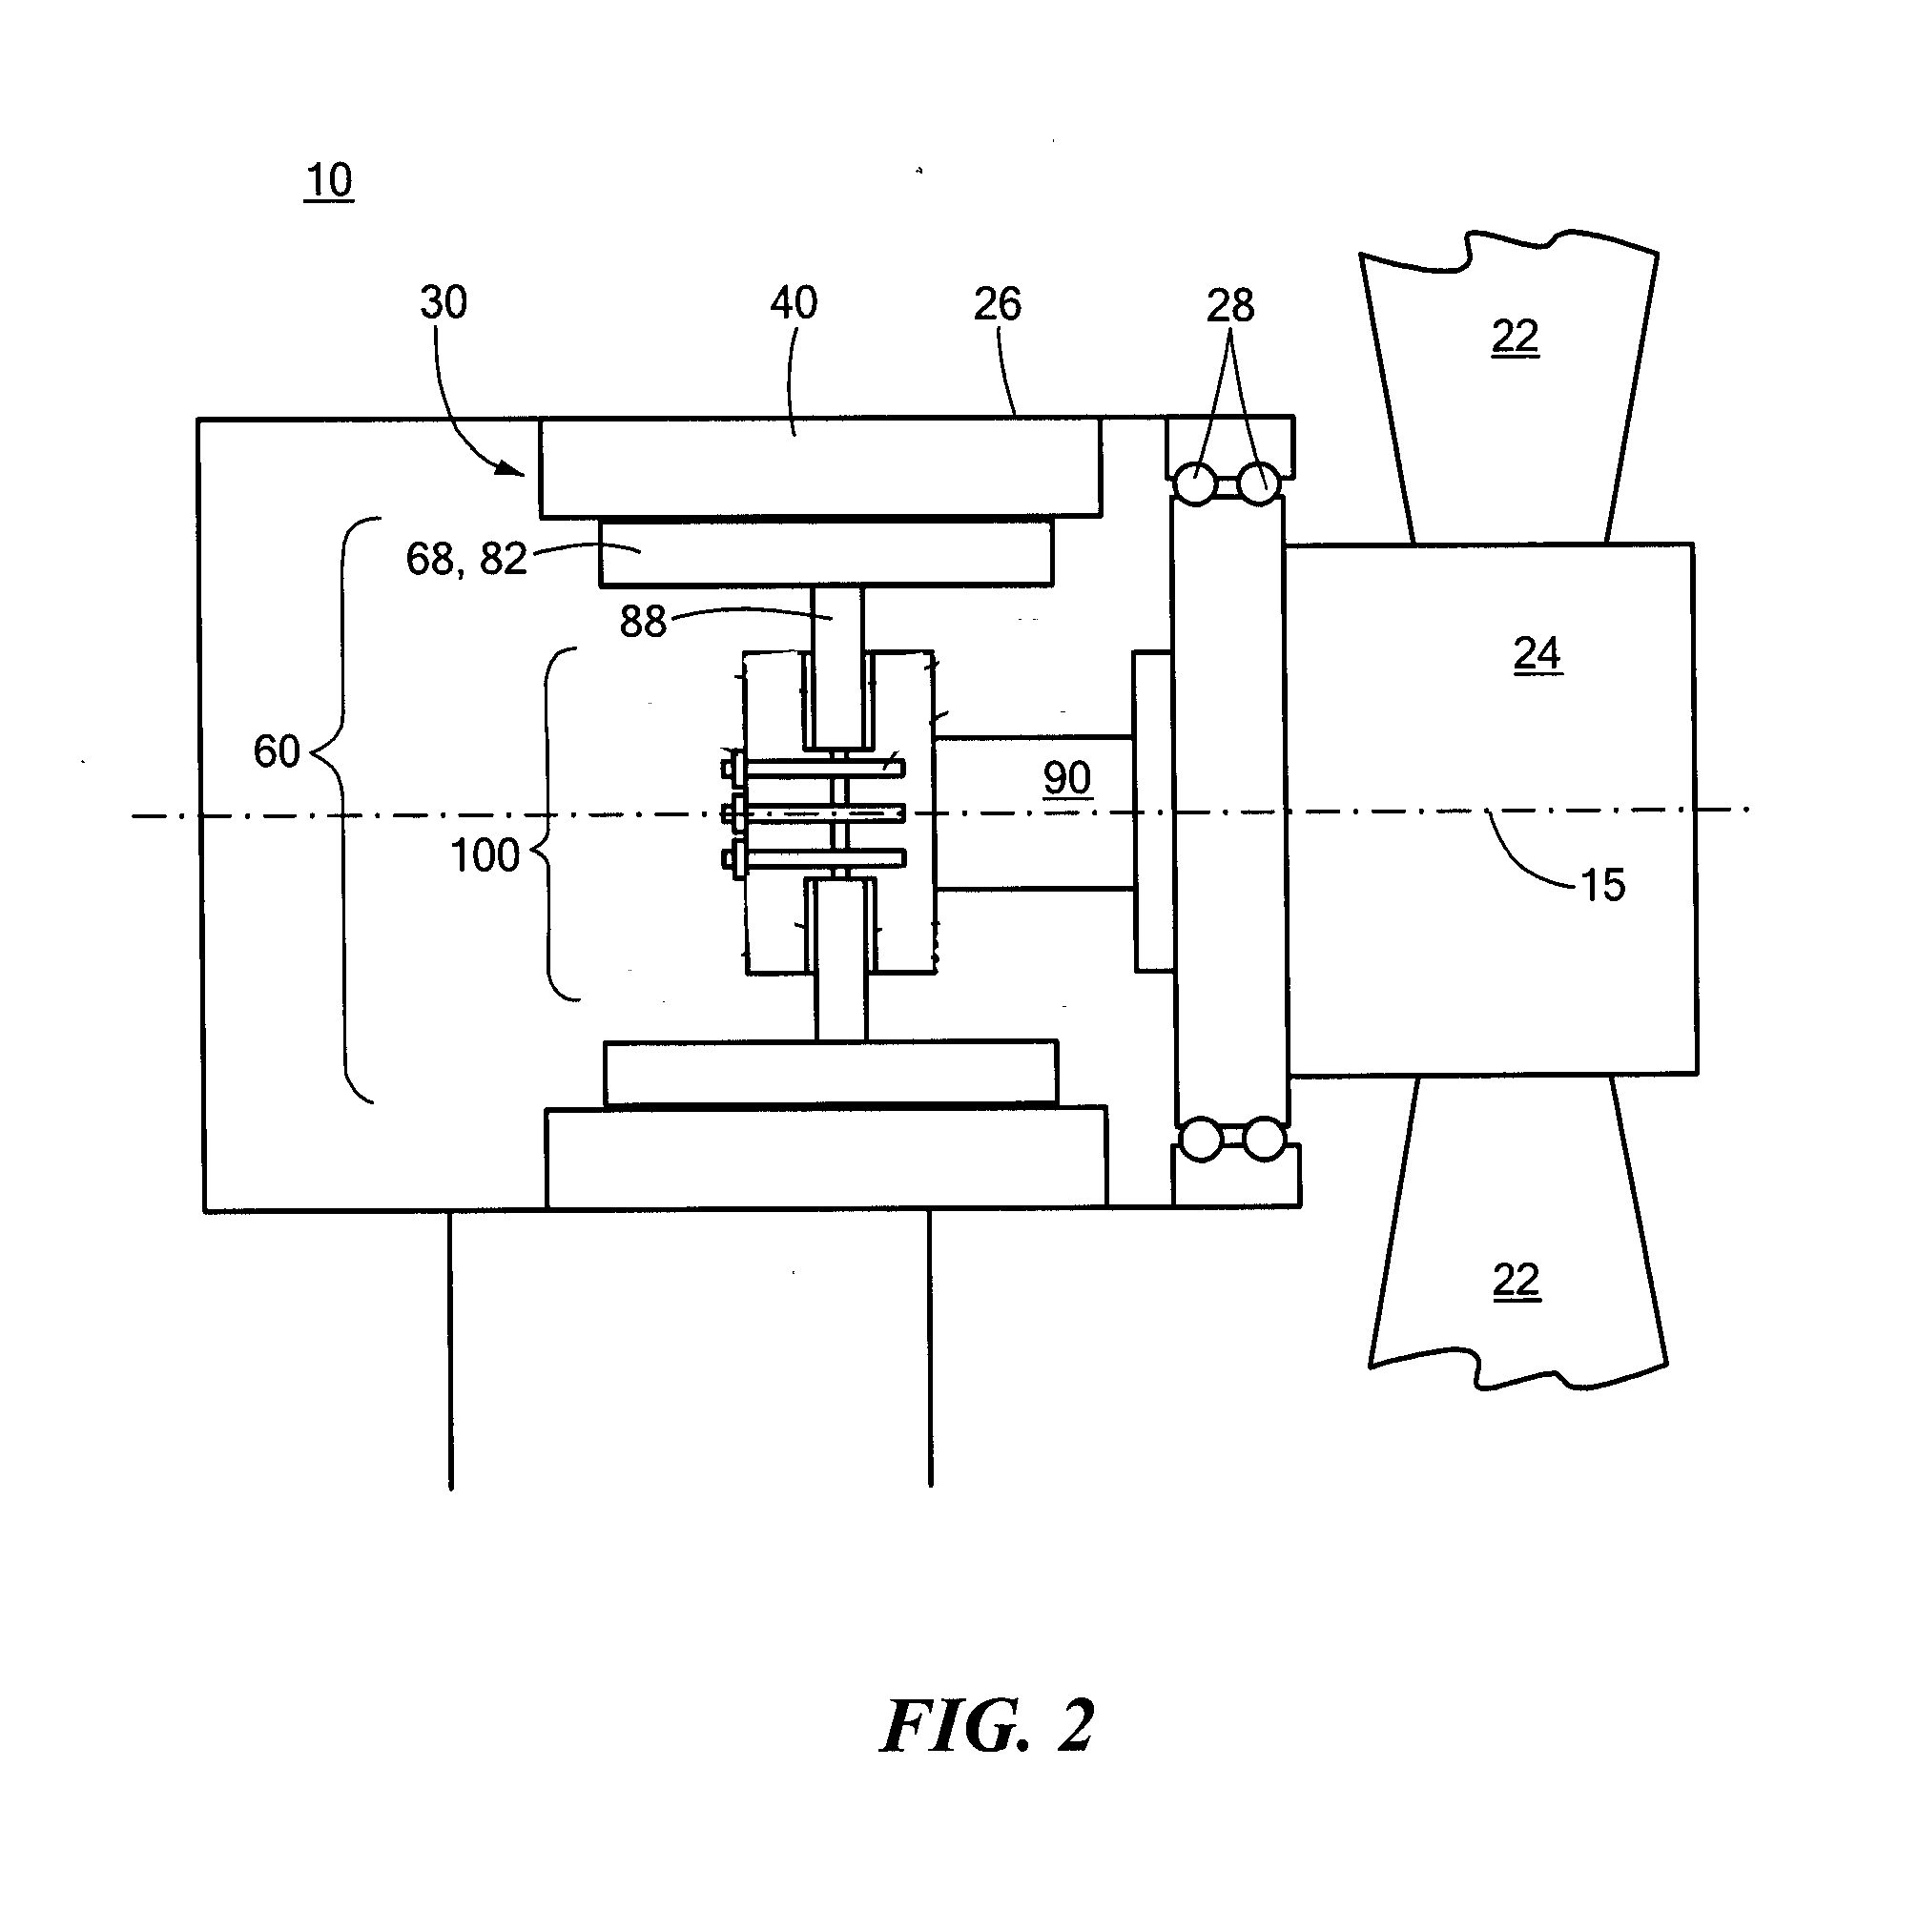 Wide electrical conductor having high c-axis strength